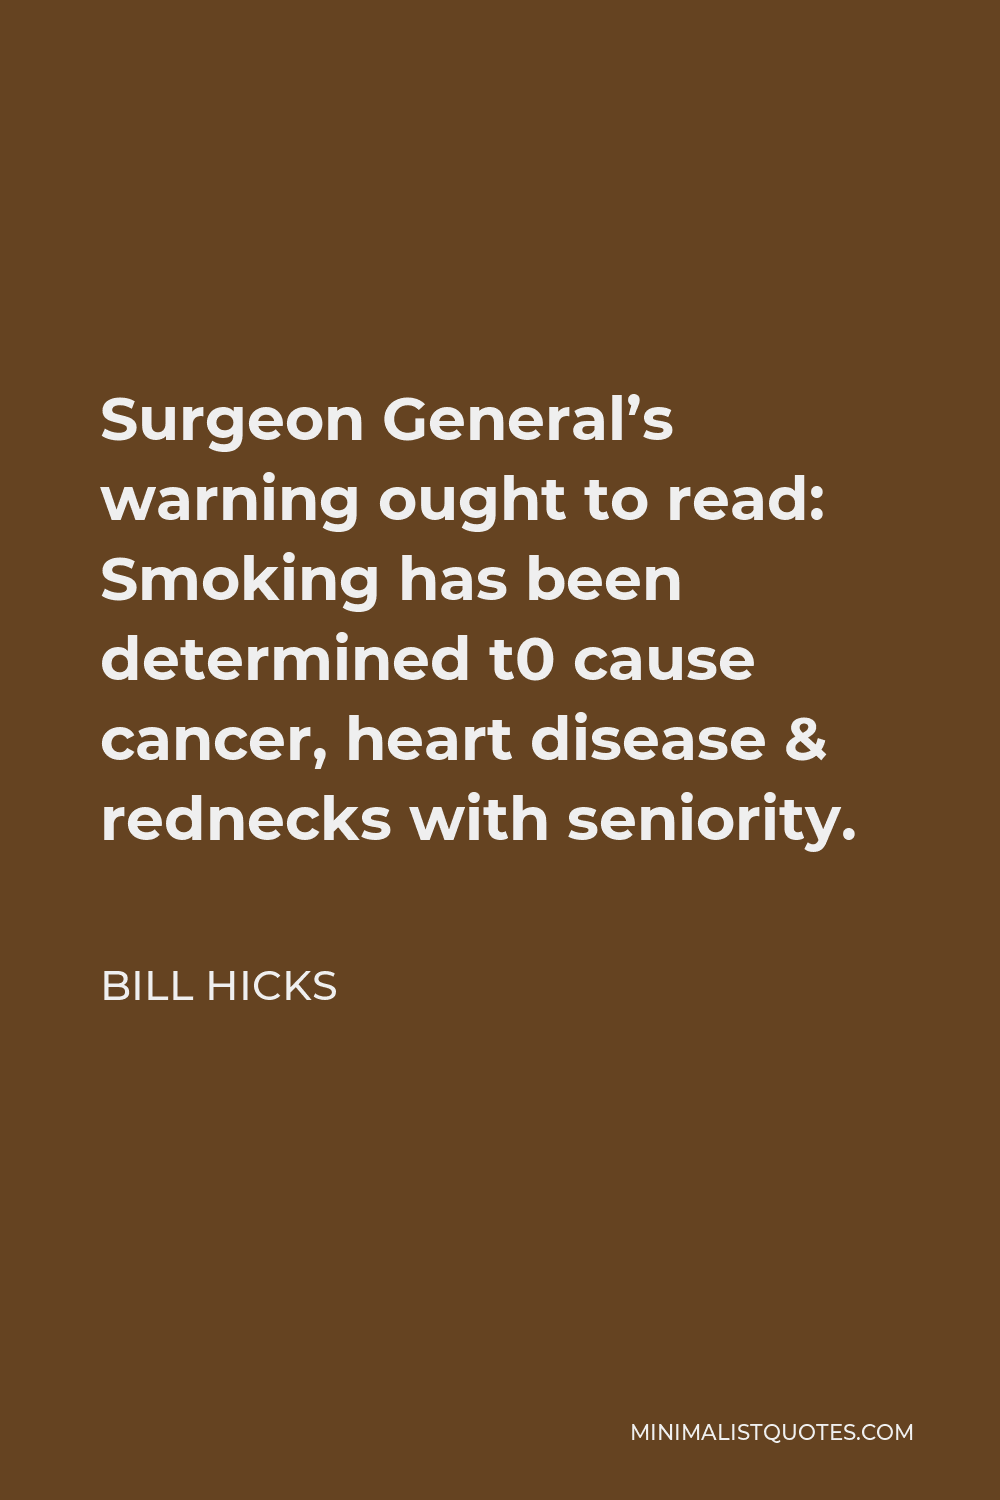 Bill Hicks Quote - Surgeon General’s warning ought to read: Smoking has been determined t0 cause cancer, heart disease & rednecks with seniority.